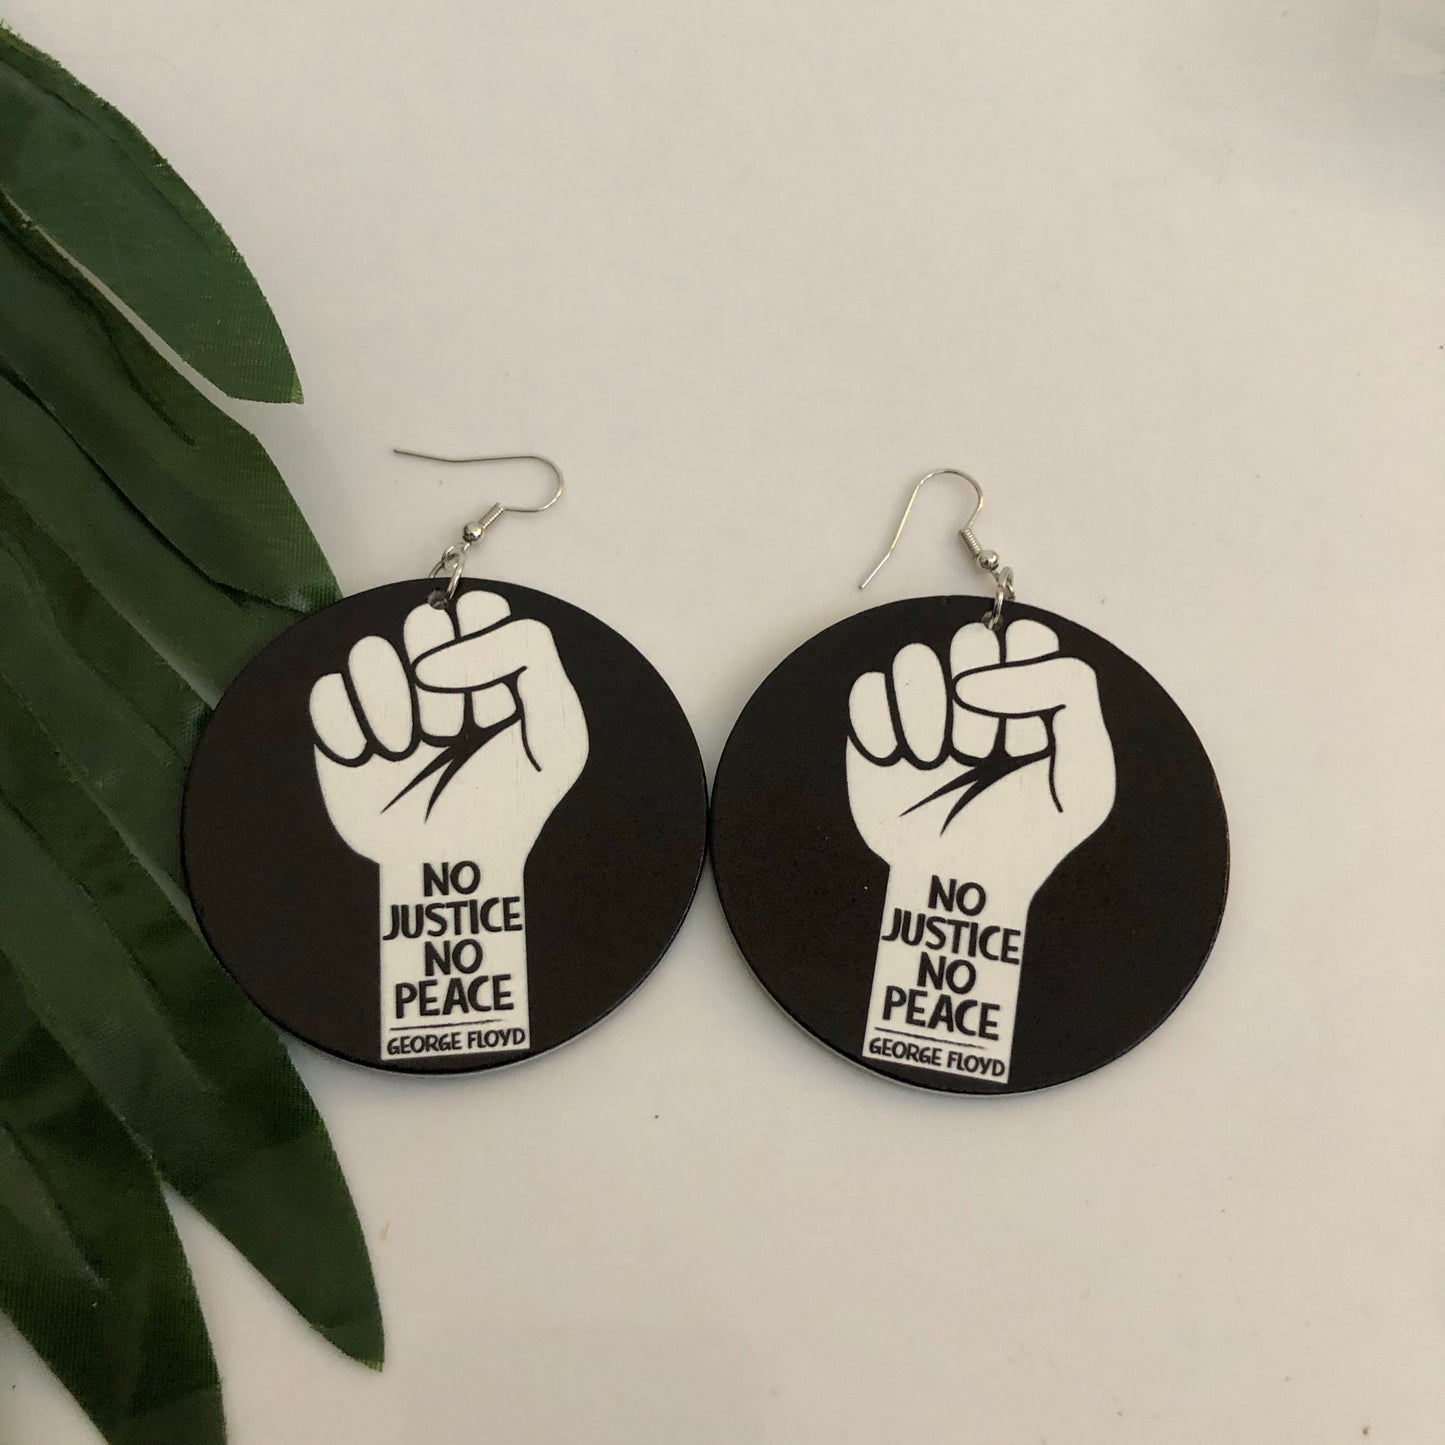 No justice no peace - wooden earrings